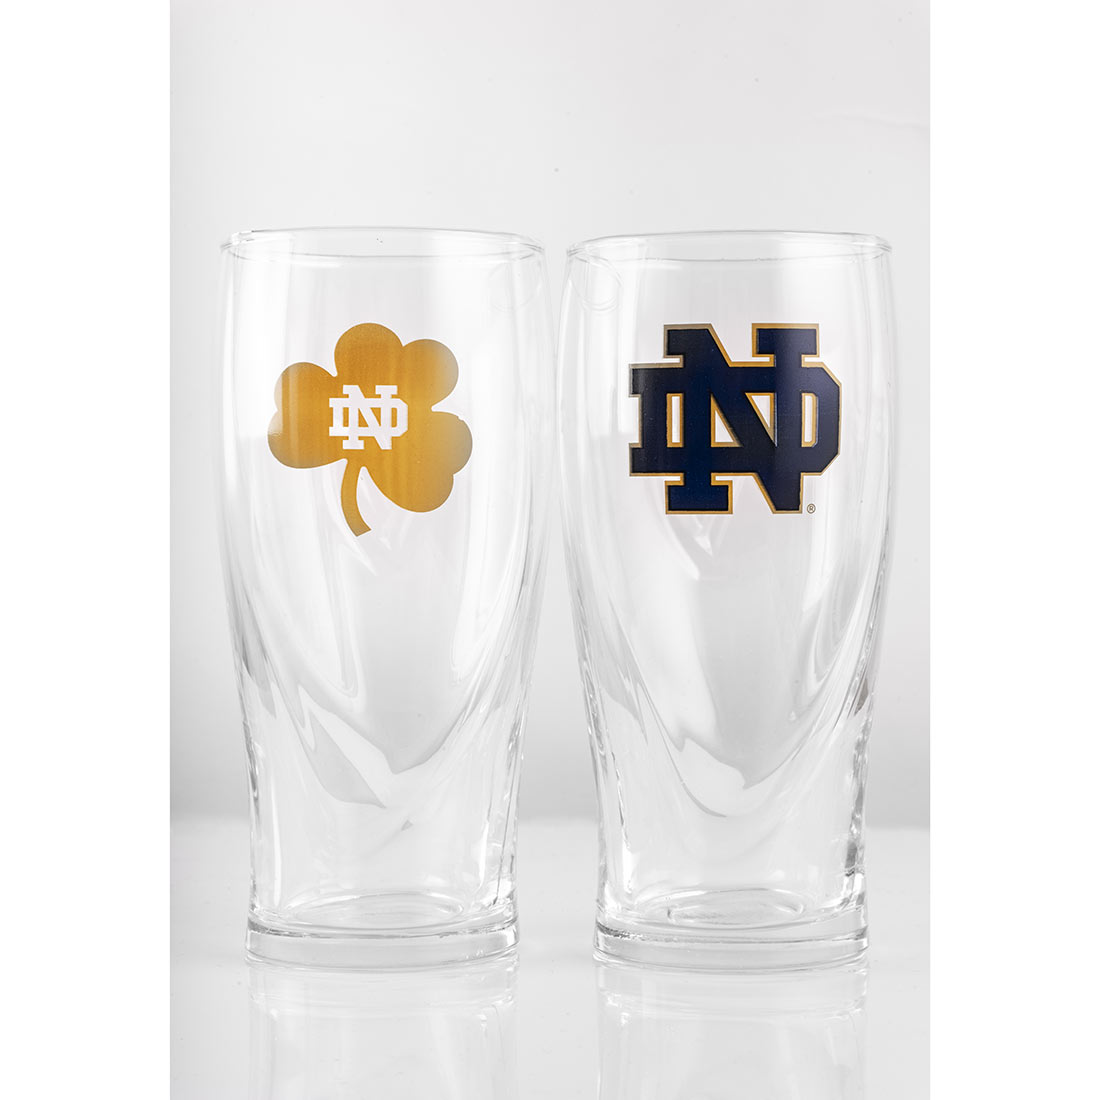 Notre Dame Guinness 16oz Pint Glass 2 Pack, perfect for enjoying a pint of Guinness while cheering on your favorite football team.